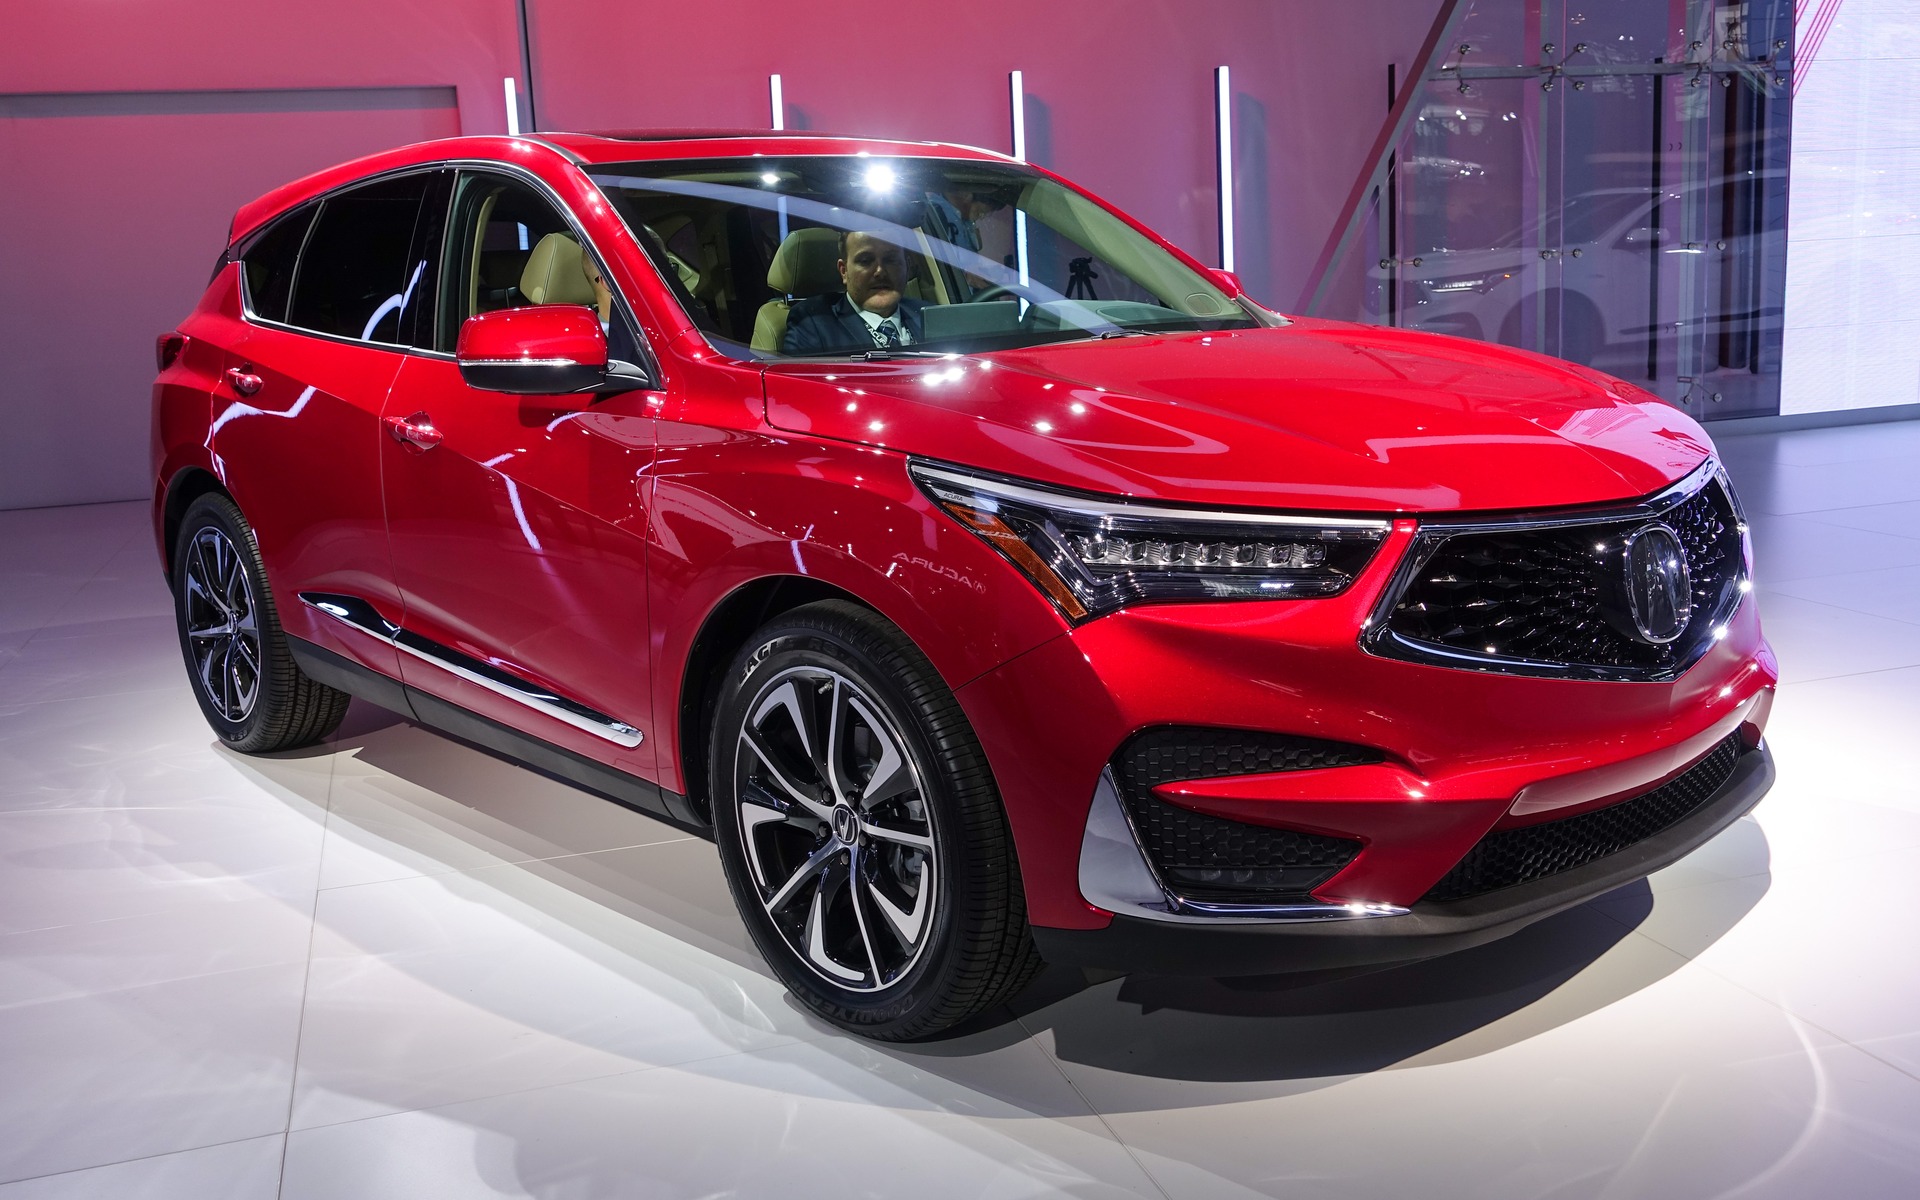 2019 Acura RDX: The Third Generation Makes its World Debut - The Car Guide